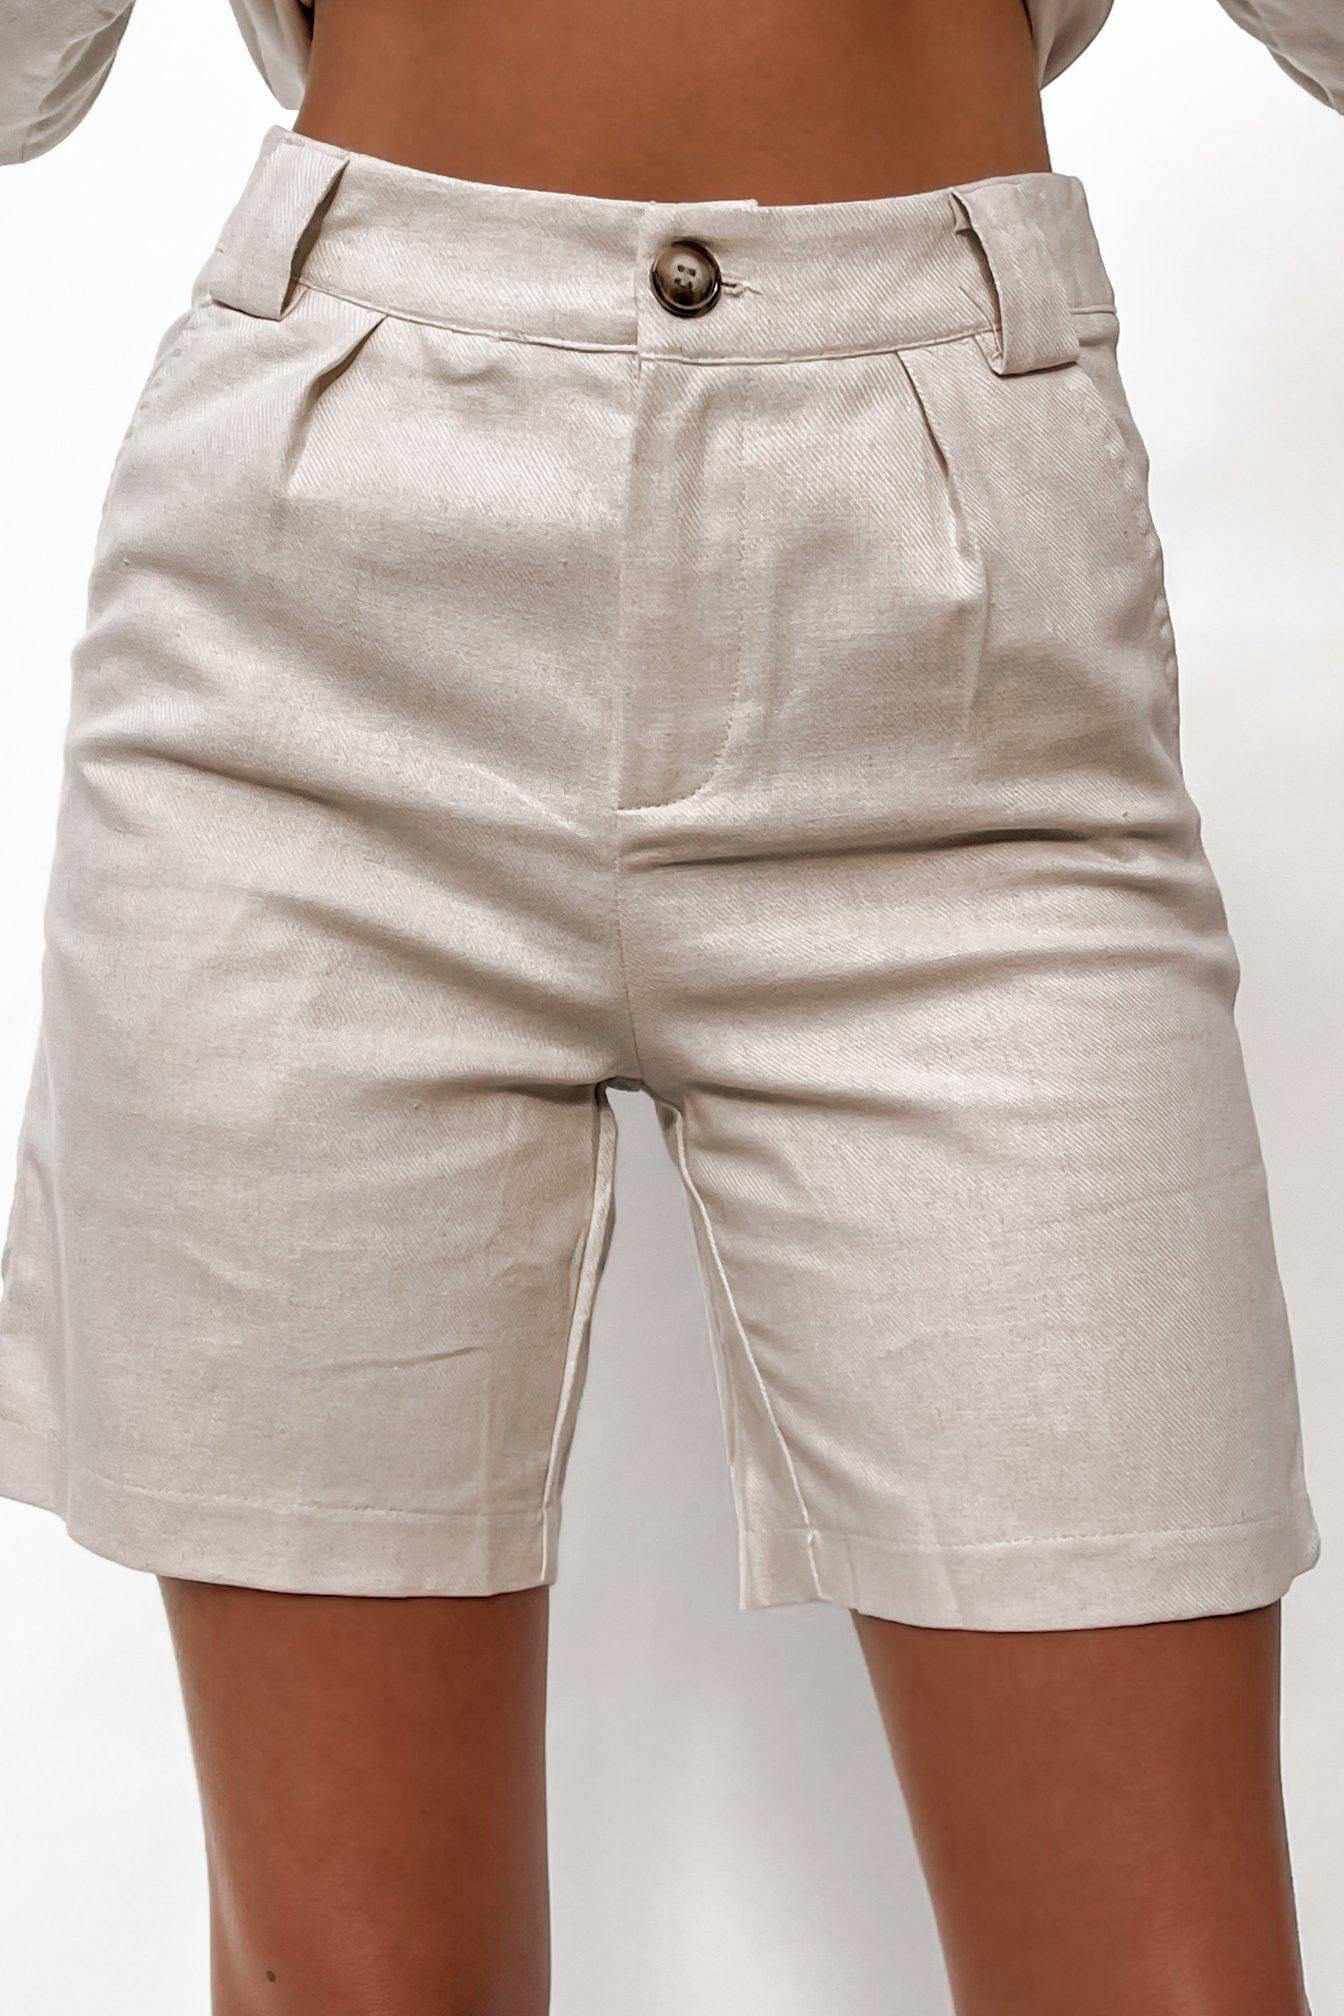 Took Your Time Shorts, BEIGE, BOTTOMS, Sale, SETS, SHORTS, Shop The Latest Took Your Time Shorts Only 60.00 from MISHKAH FASHION:, Our New Took Your Time Shorts is only $61.00-We Have The Latest Pants | Shorts | Skirts @ Mishkah Online Fashion Boutique-MISHKAH